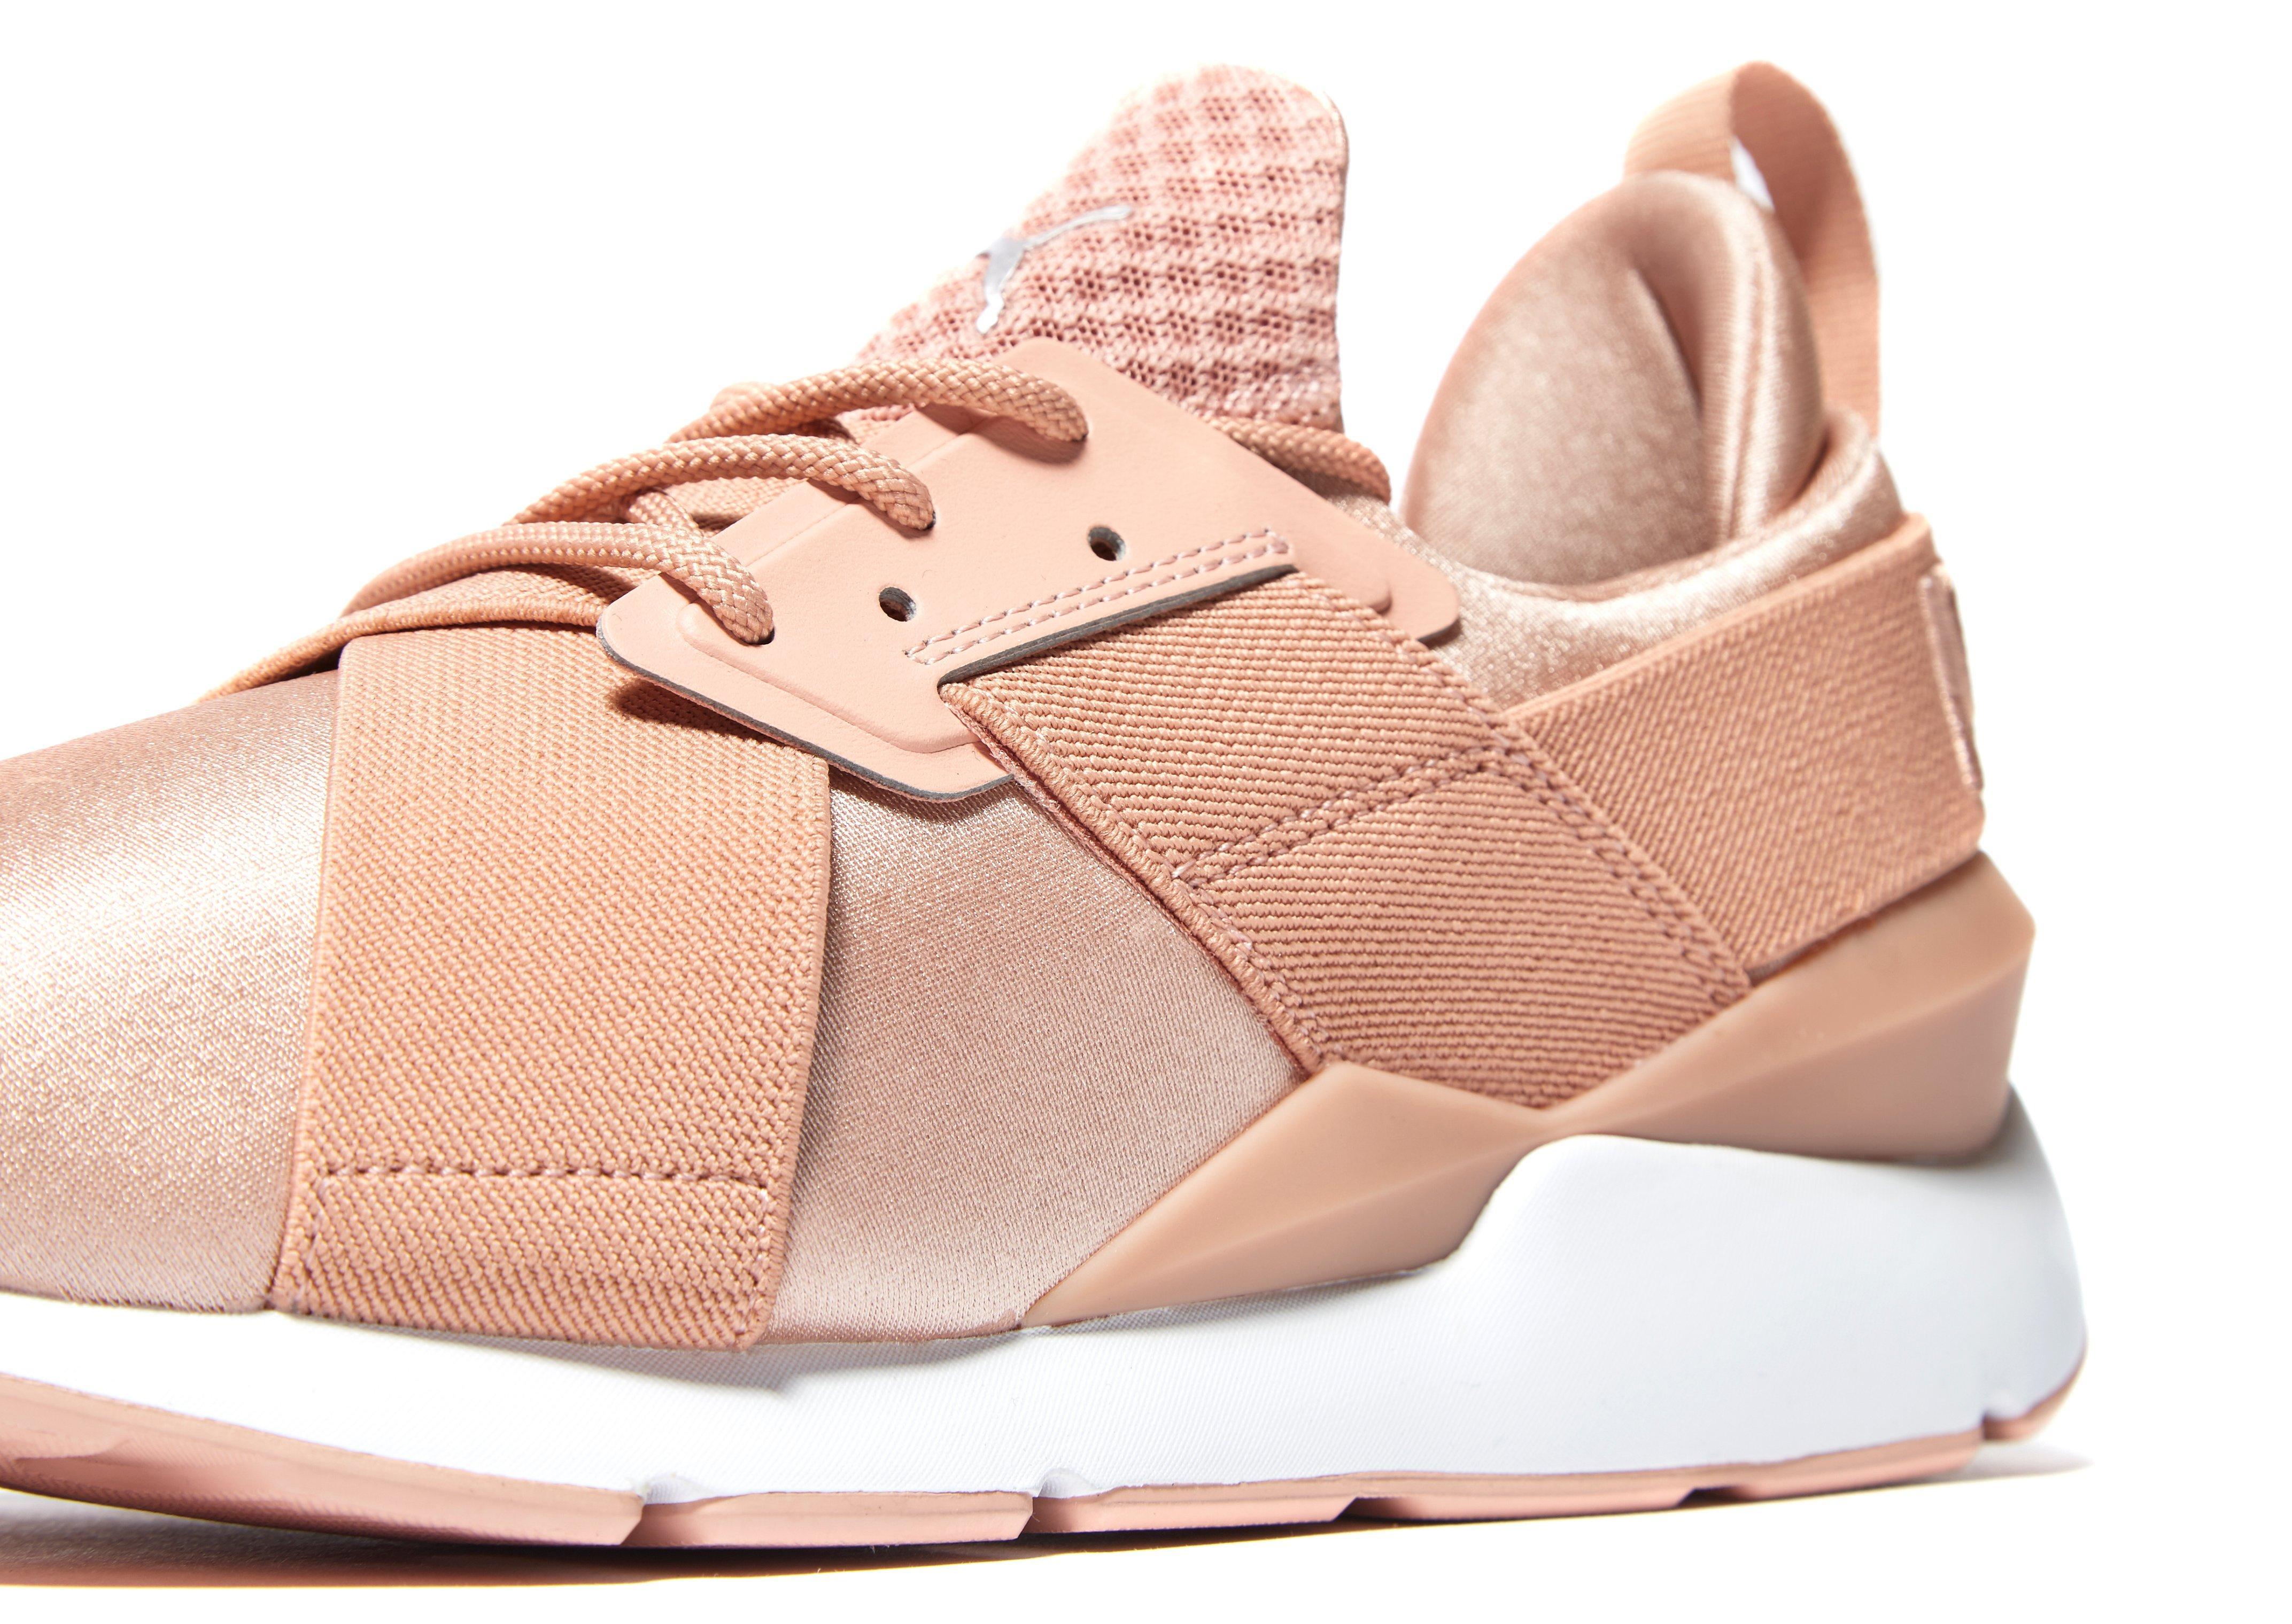 PUMA Synthetic En Pointe Muse X-strap in Peach Beige/White (Pink) - Lyst